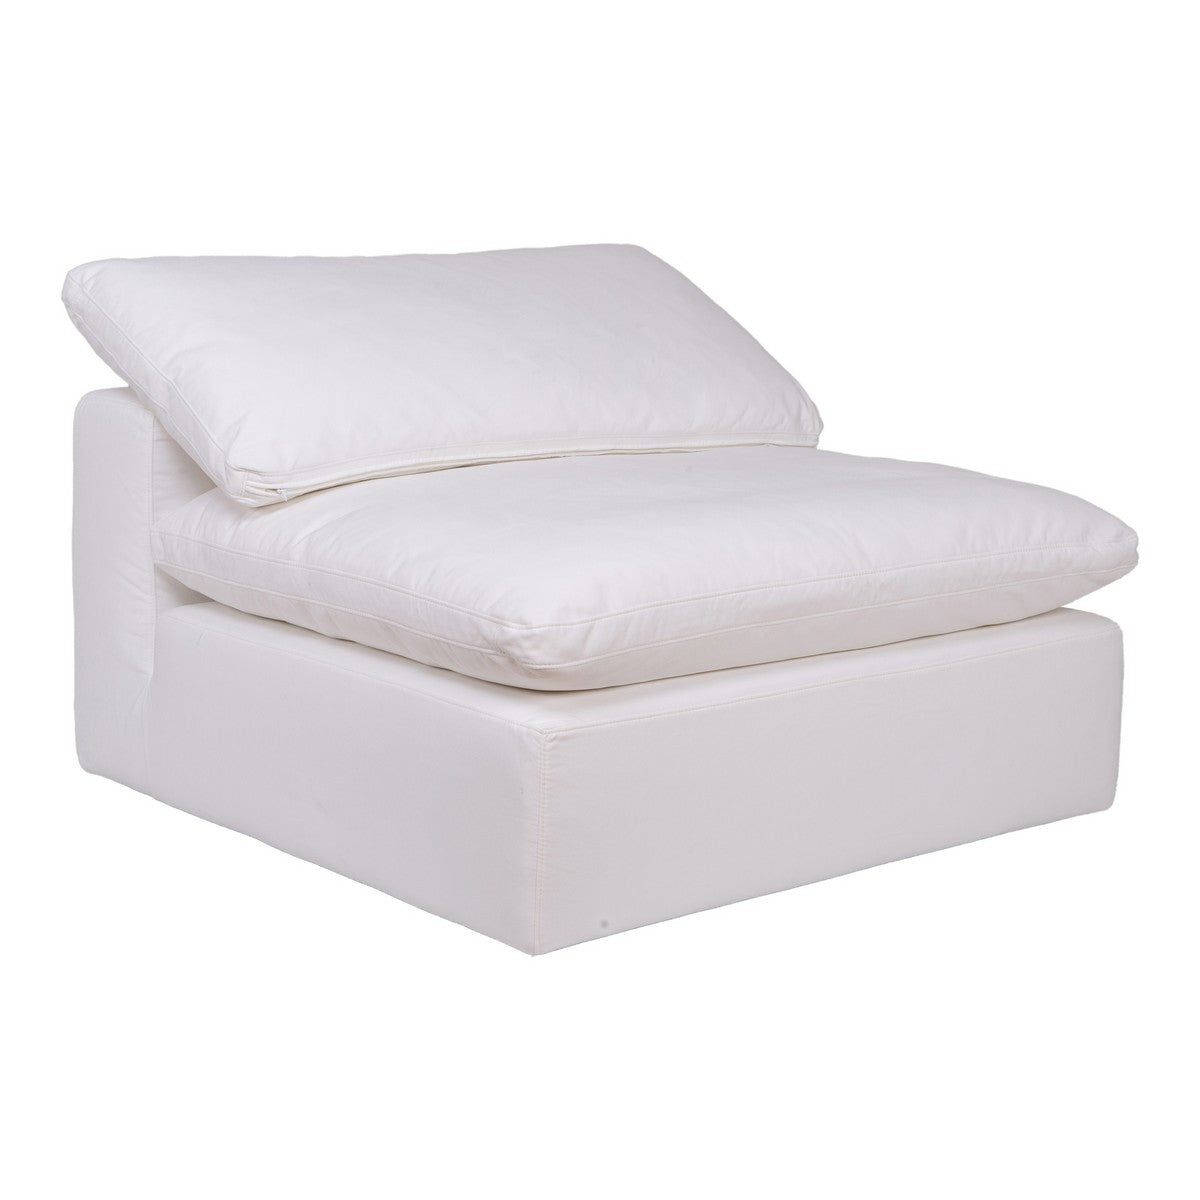 Moe's Home Collection Clay Slipper Chair Livesmart Fabric Cream - YJ-1001-05